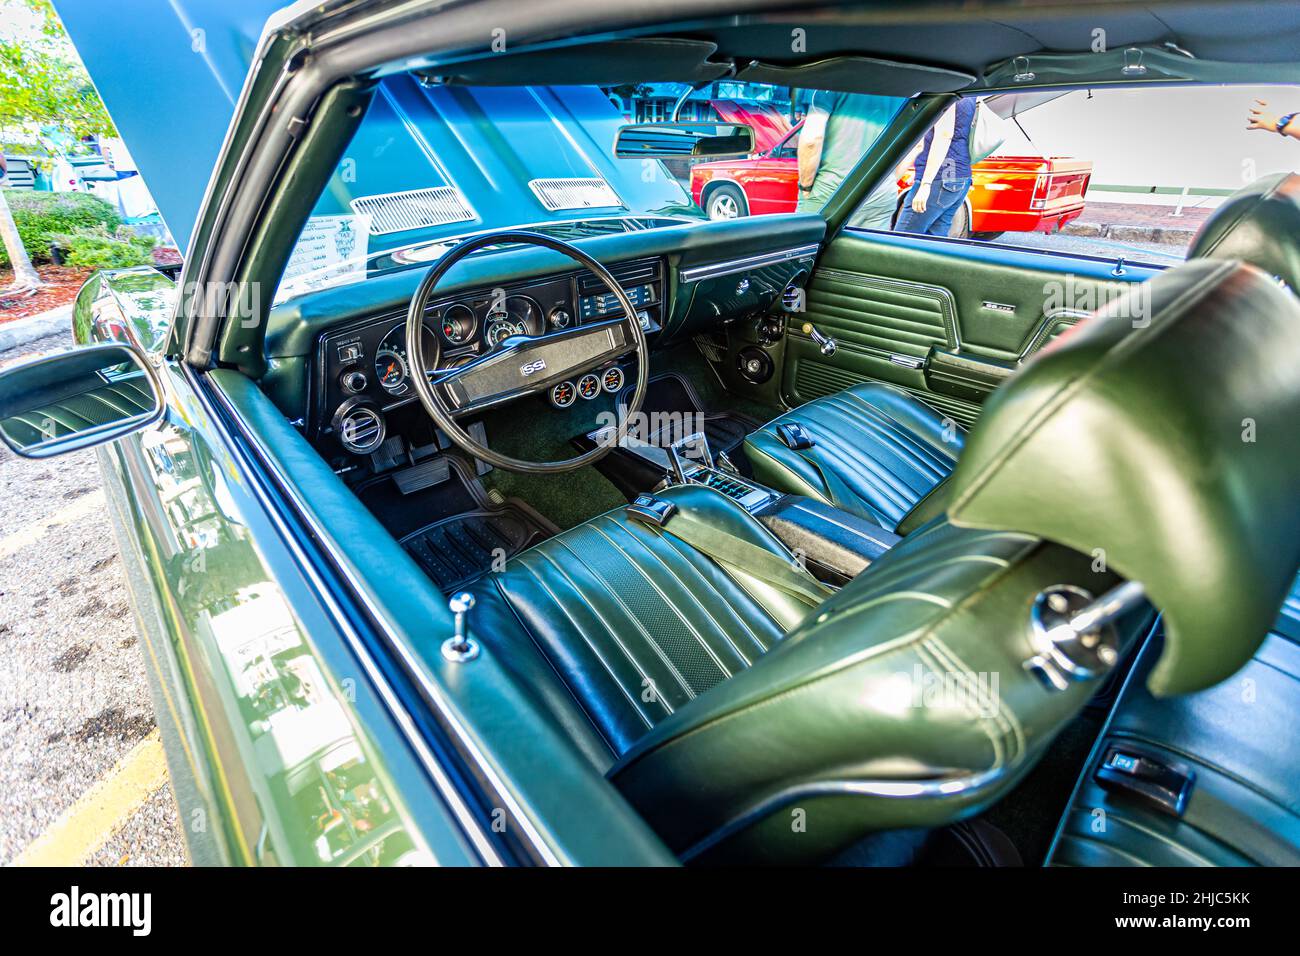 Fernandina Beach, FL - October 18, 2014: Wide angle interior view of a 1969 Chevrolet Chevelle SS 396 Coupe at a classic car show in Fernandina Beach, Stock Photo